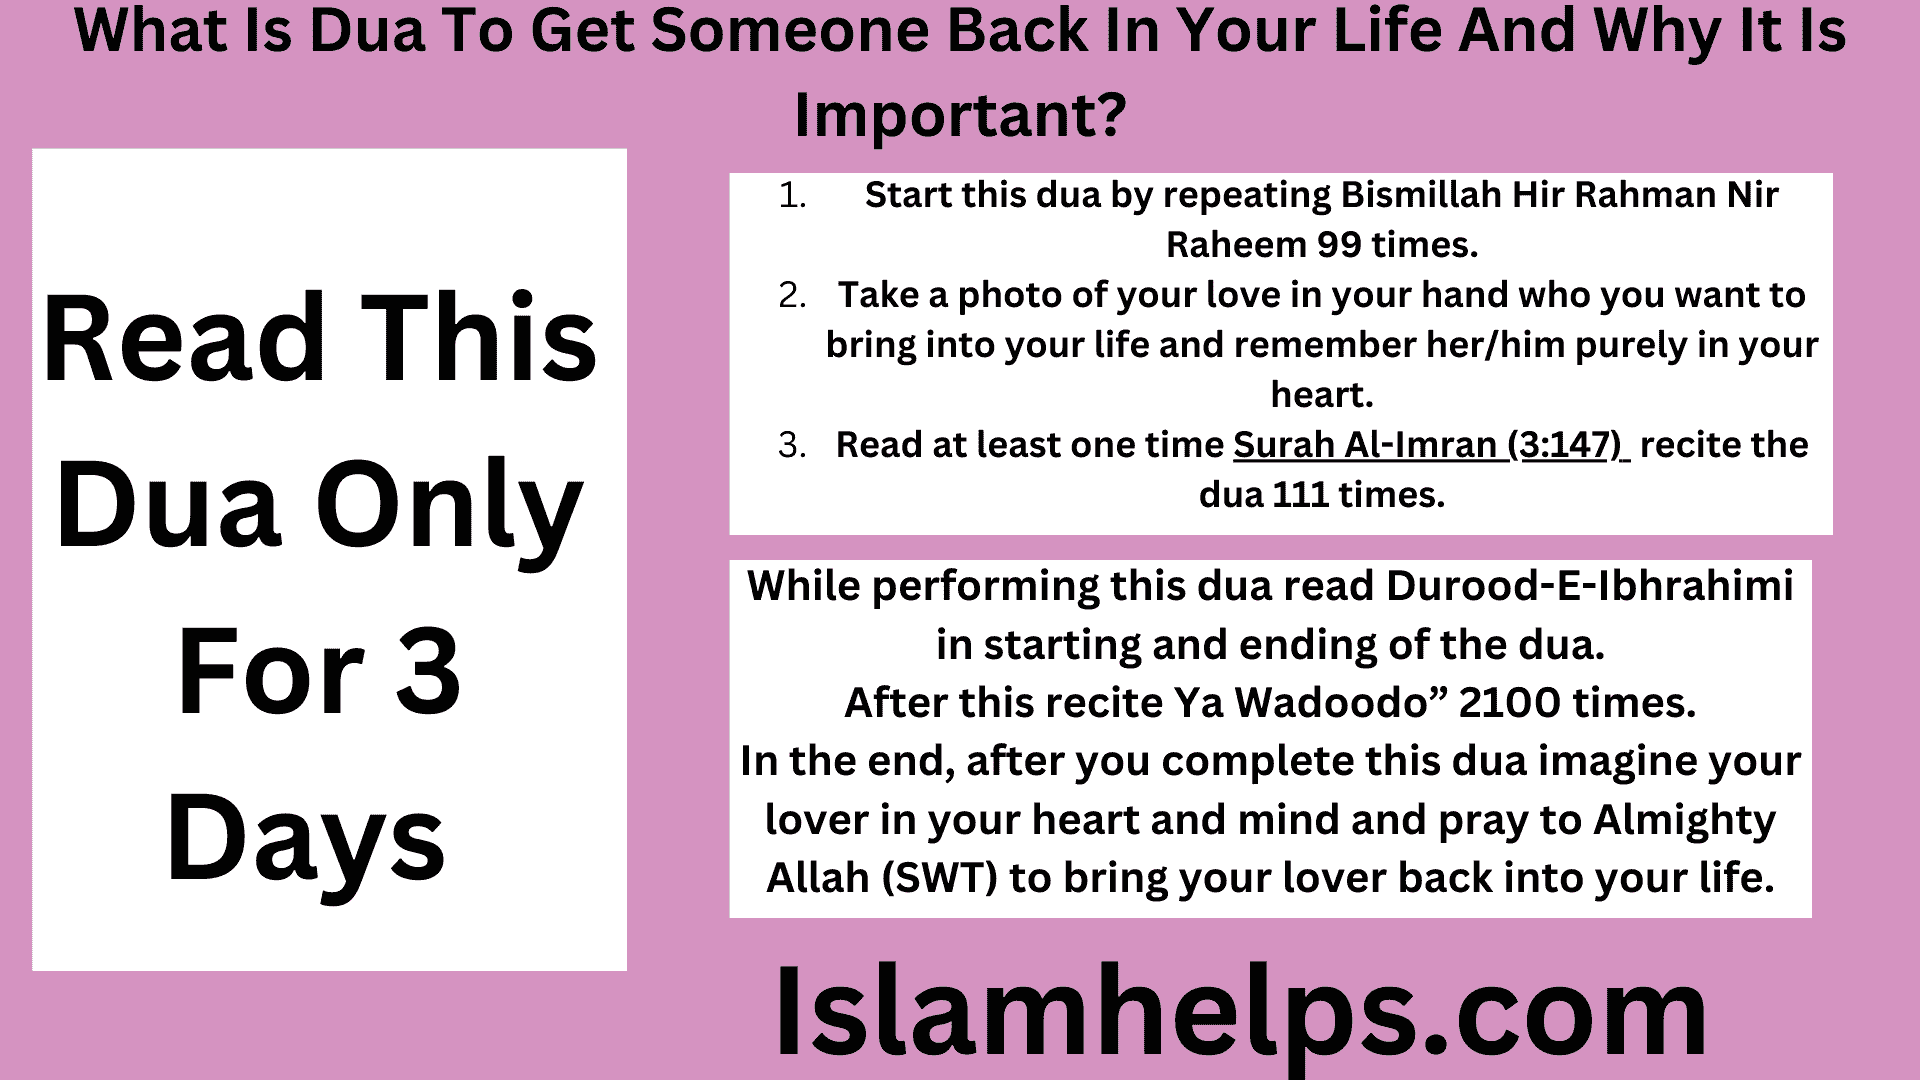 What Is Dua To Get Someone Back In Your Life And Why It Is Important?